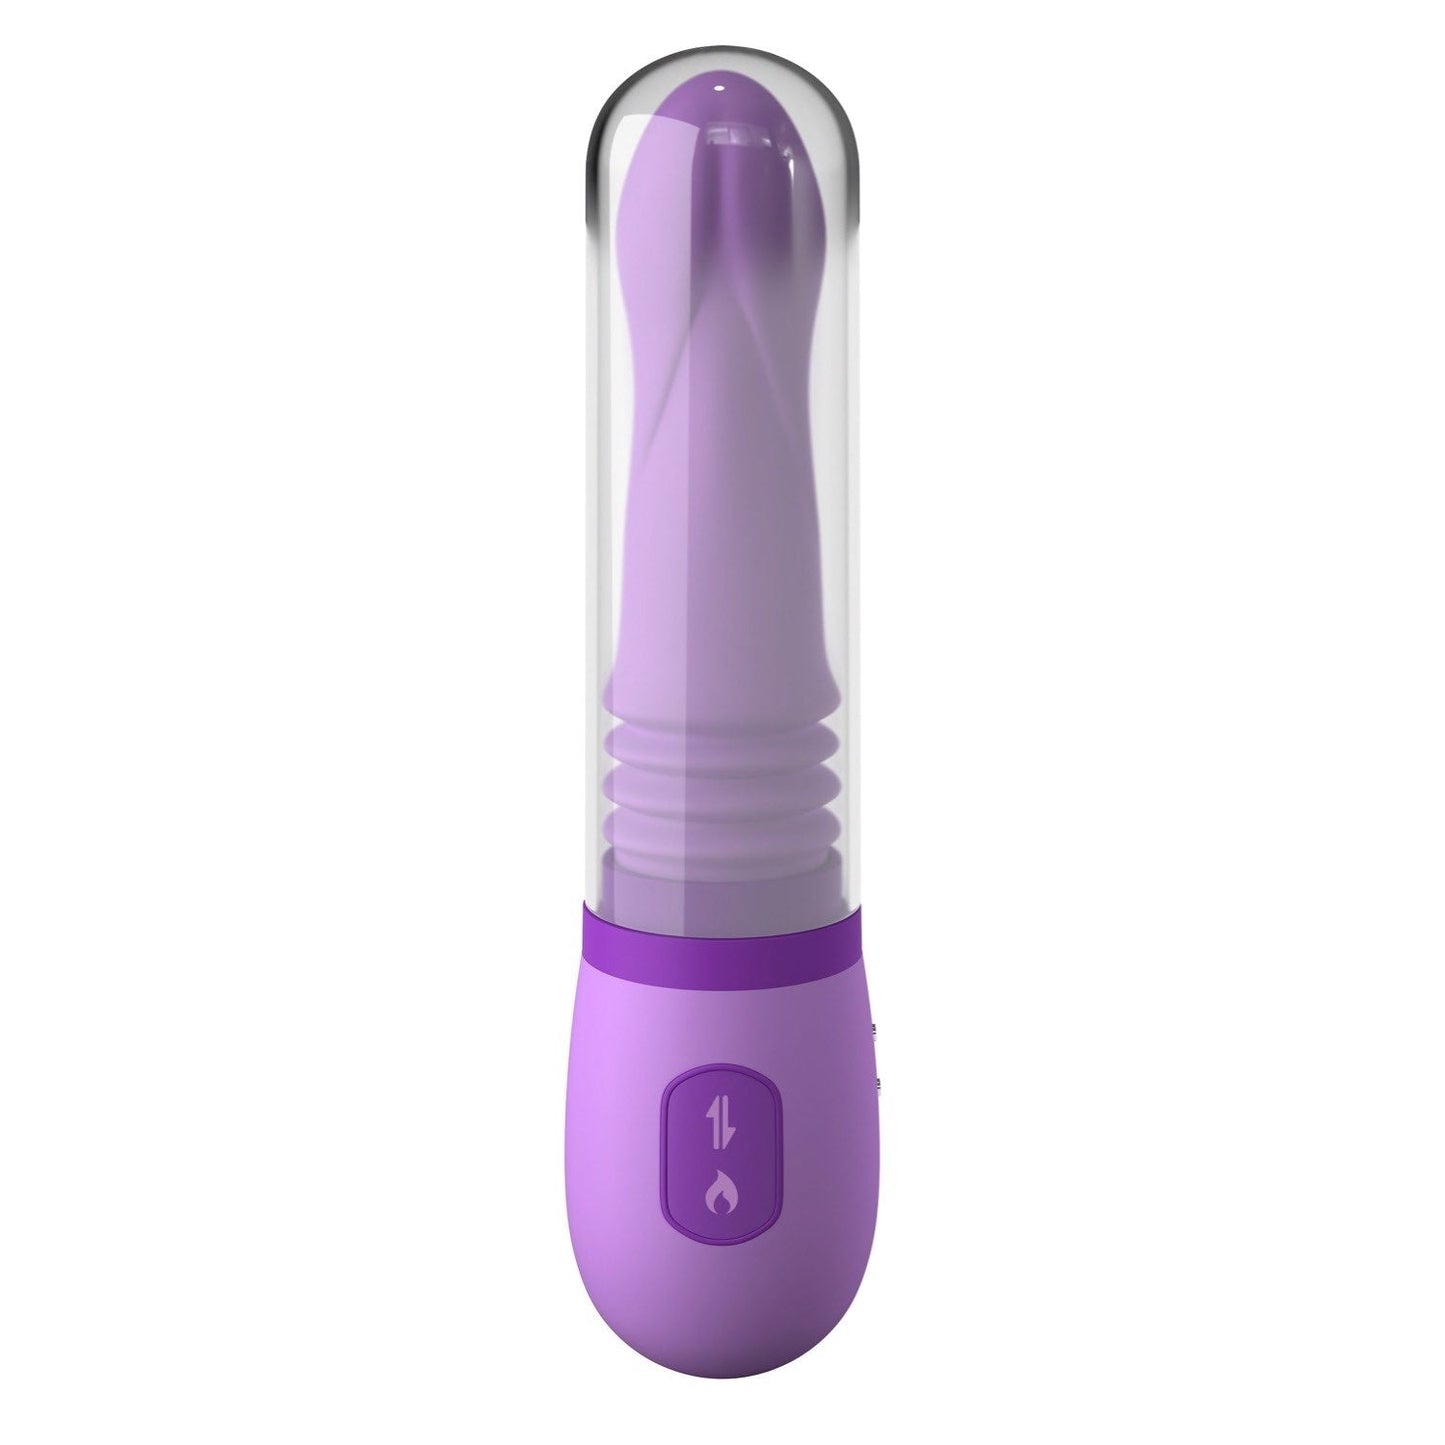 Personal Sex Machine - Purple 21.3 cm (8.5") USB Rechargeable Thrusting & Gyrating Vibrator